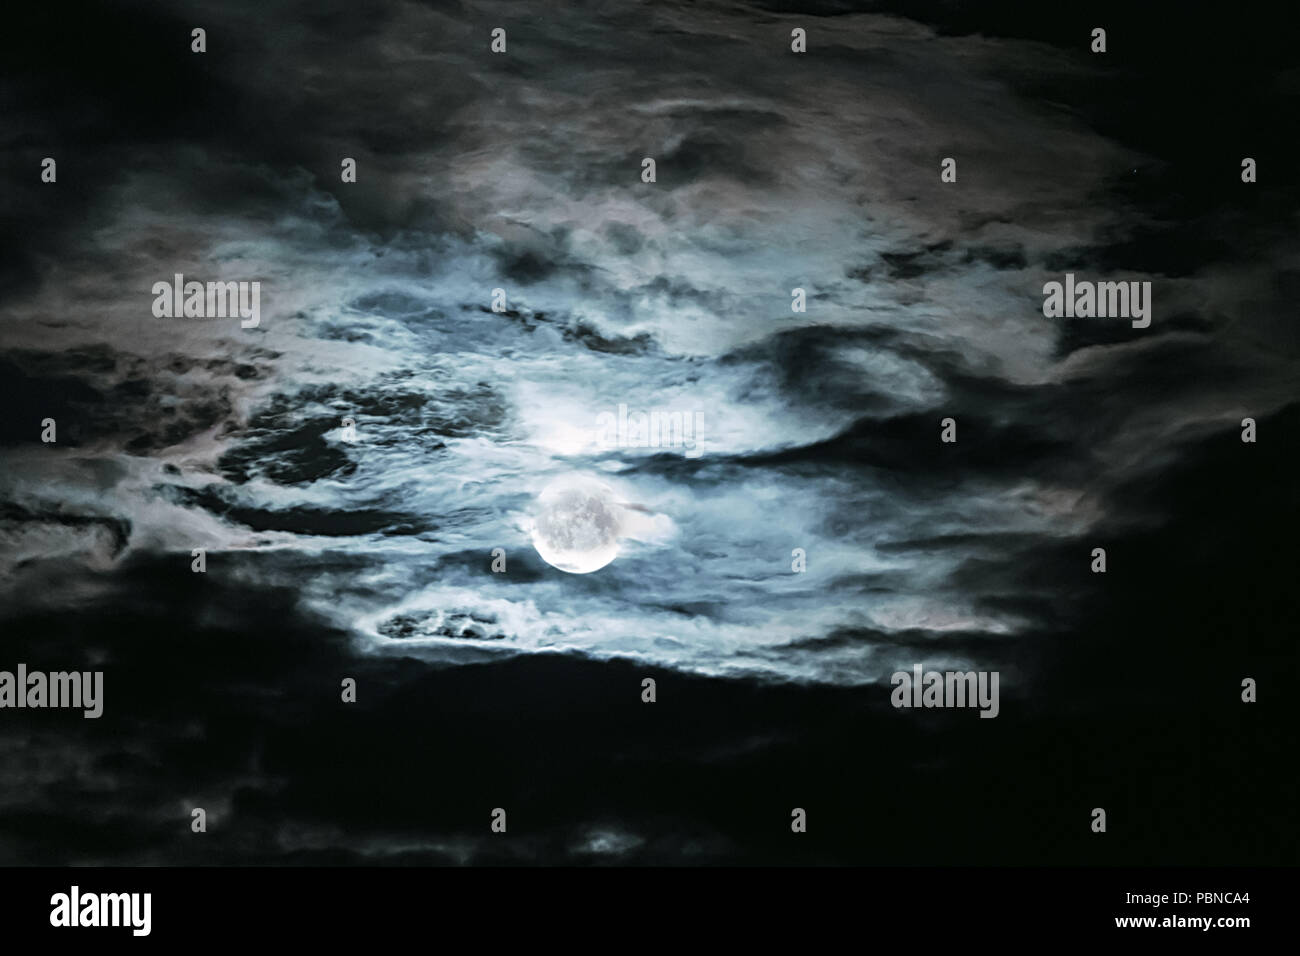 Full Moon Behind The Dramatic Clouds In A Dark Night Sky Stock Photo Alamy